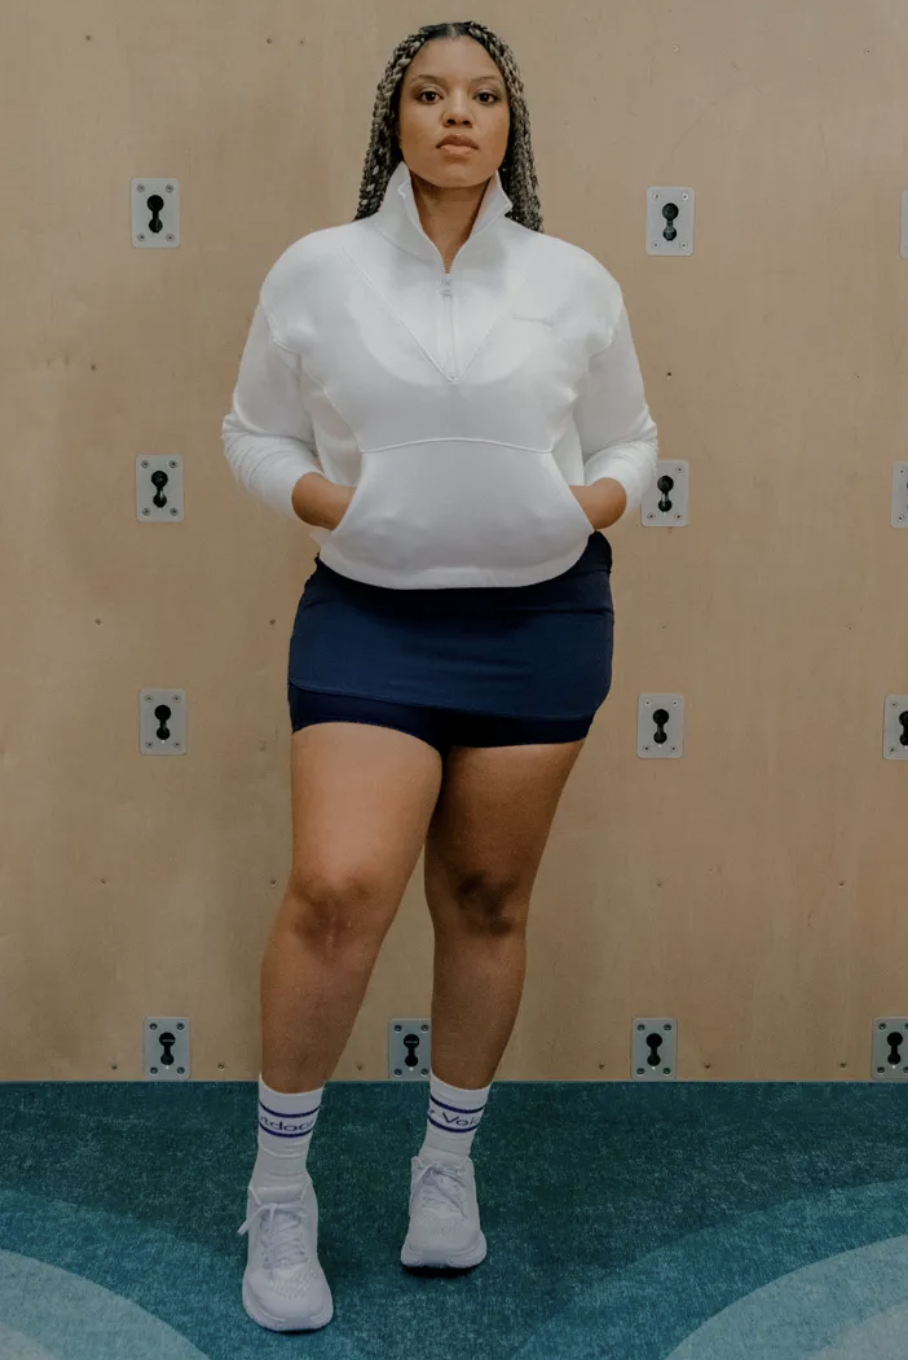 White athletic skirt ideas. Comfy outfits ideas. Tennis outfit